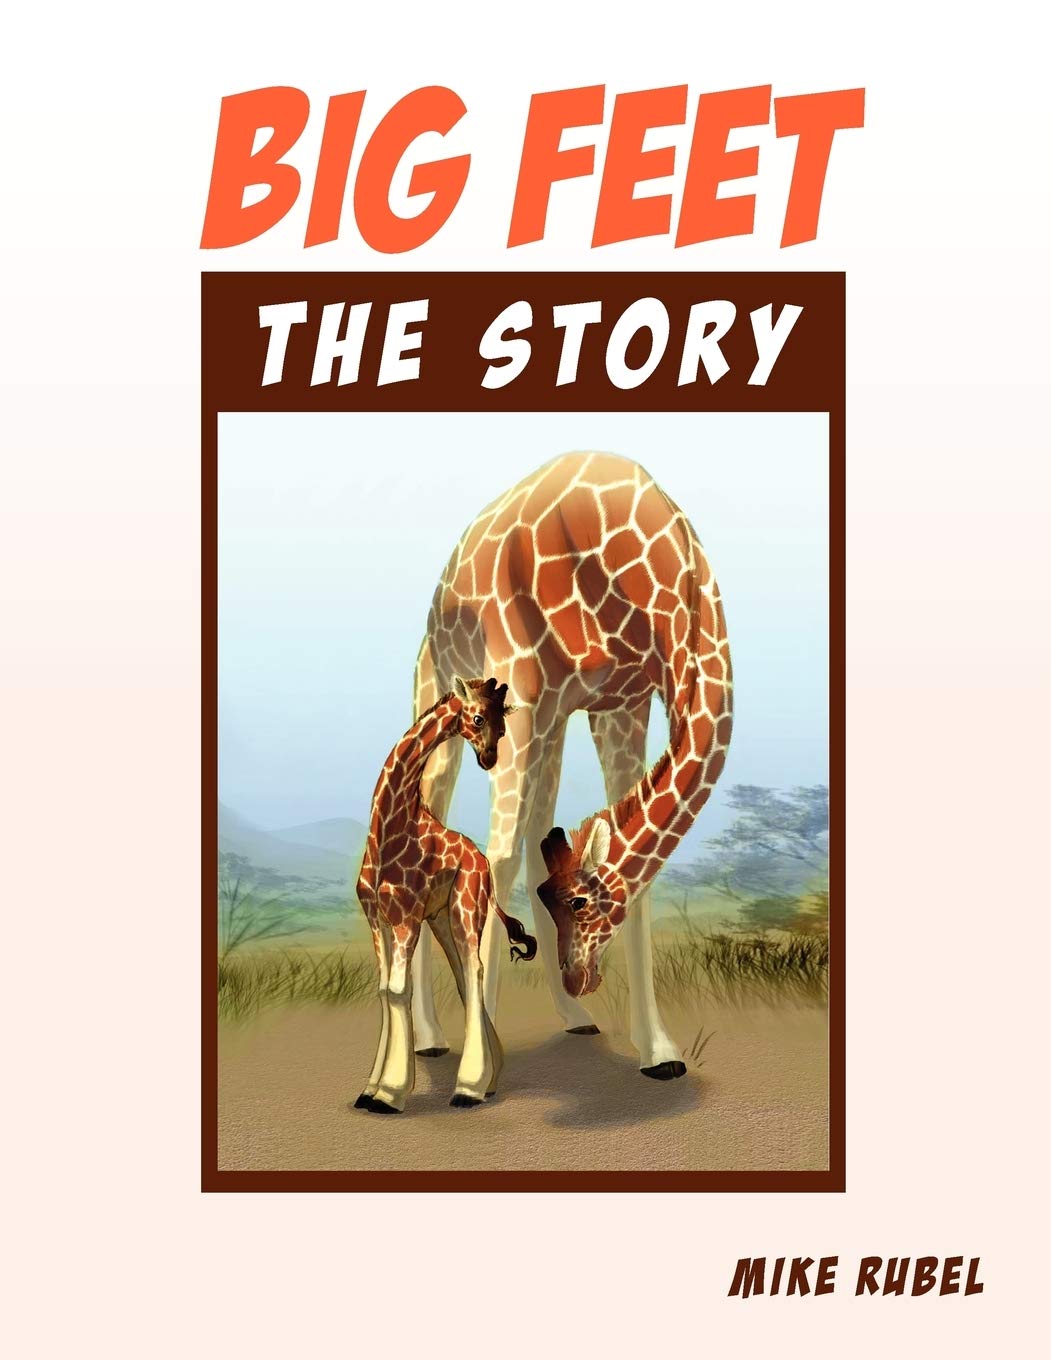 Mikel Rubel Launches new book titled Big Feet, The Story of a Giant; promoted by Author’s Tranquility Press 1